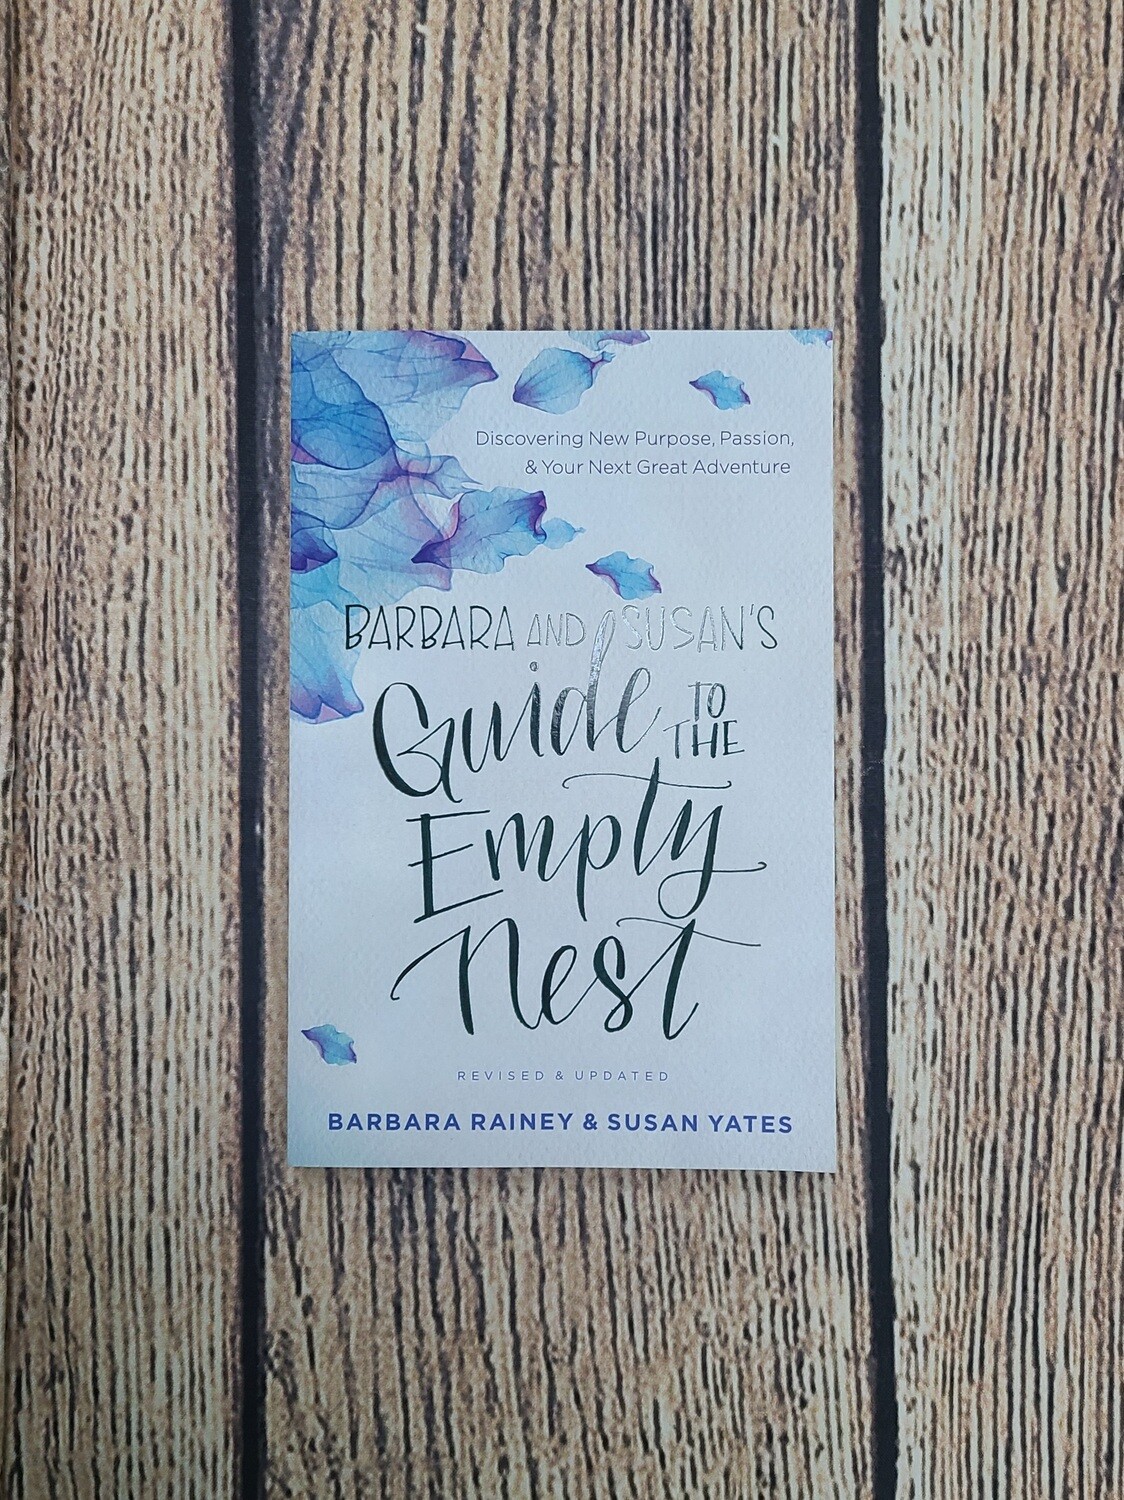 Barbara and Susan's Guide to the Empty Nest by Barbara Rainey and Susan Yates